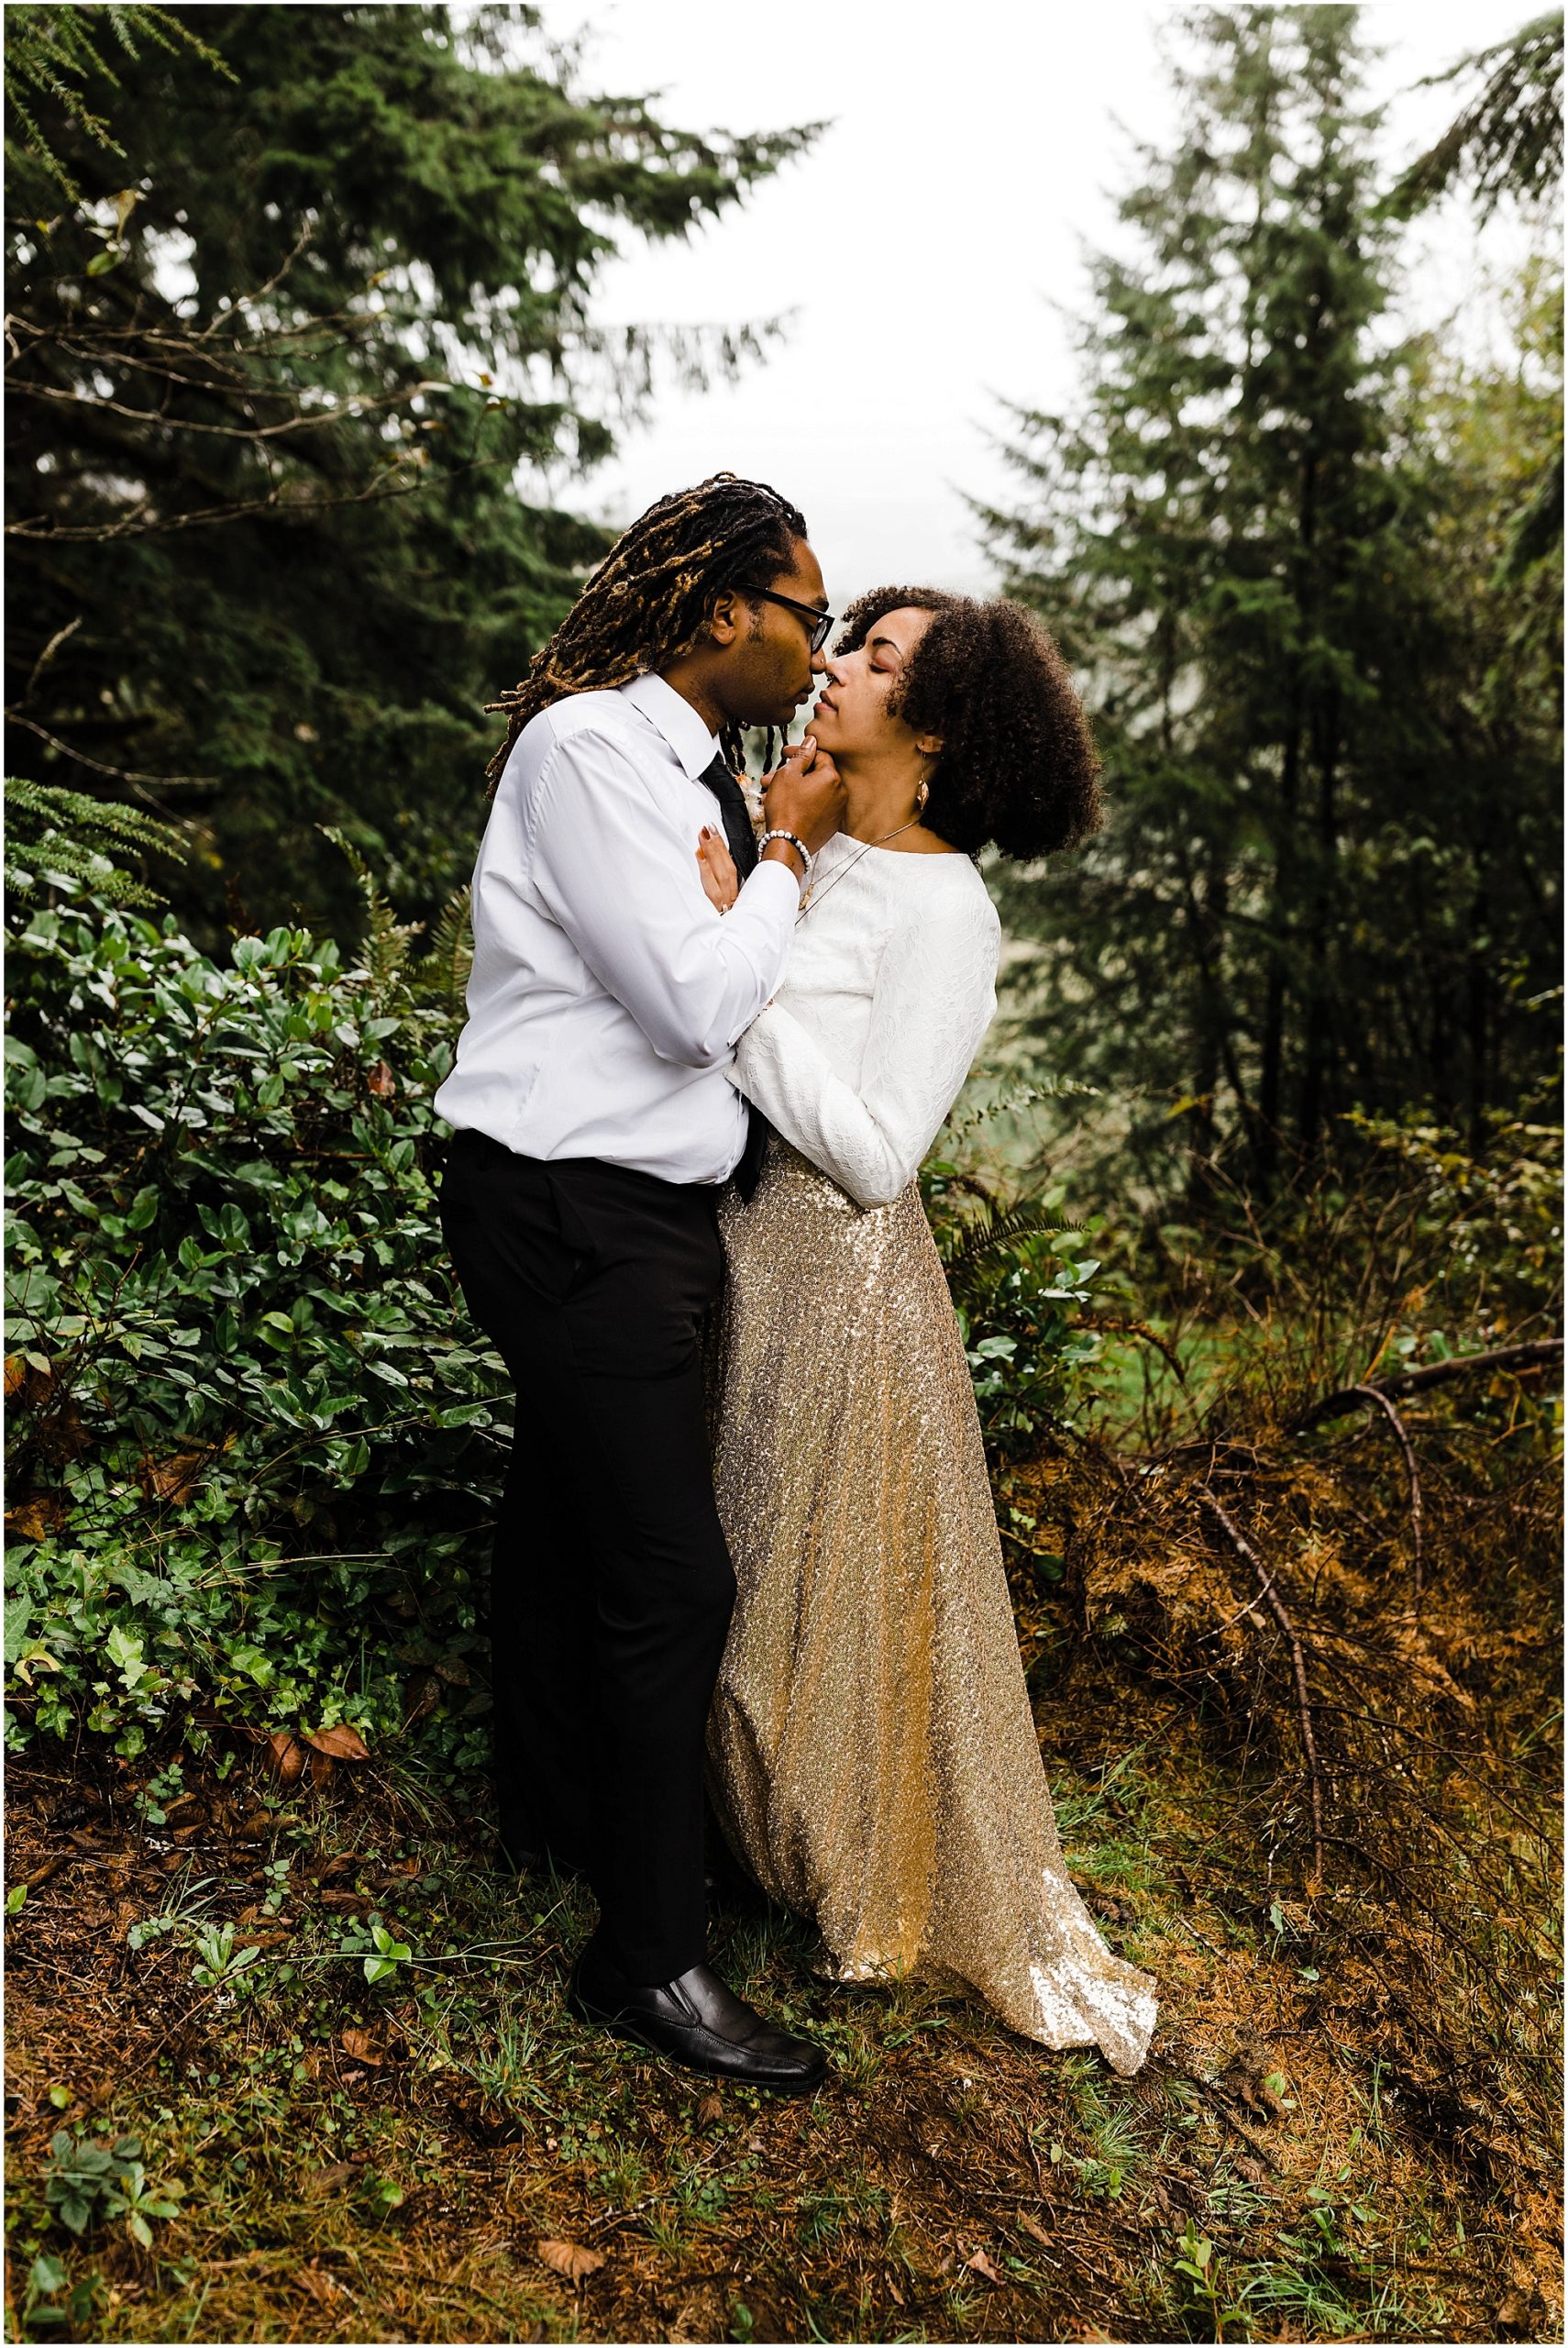 A gorgeous black man pulls his black bride's chin towards his for a romantic kiss on their Oregon Coast elopement day. | Erica Swantek Photography